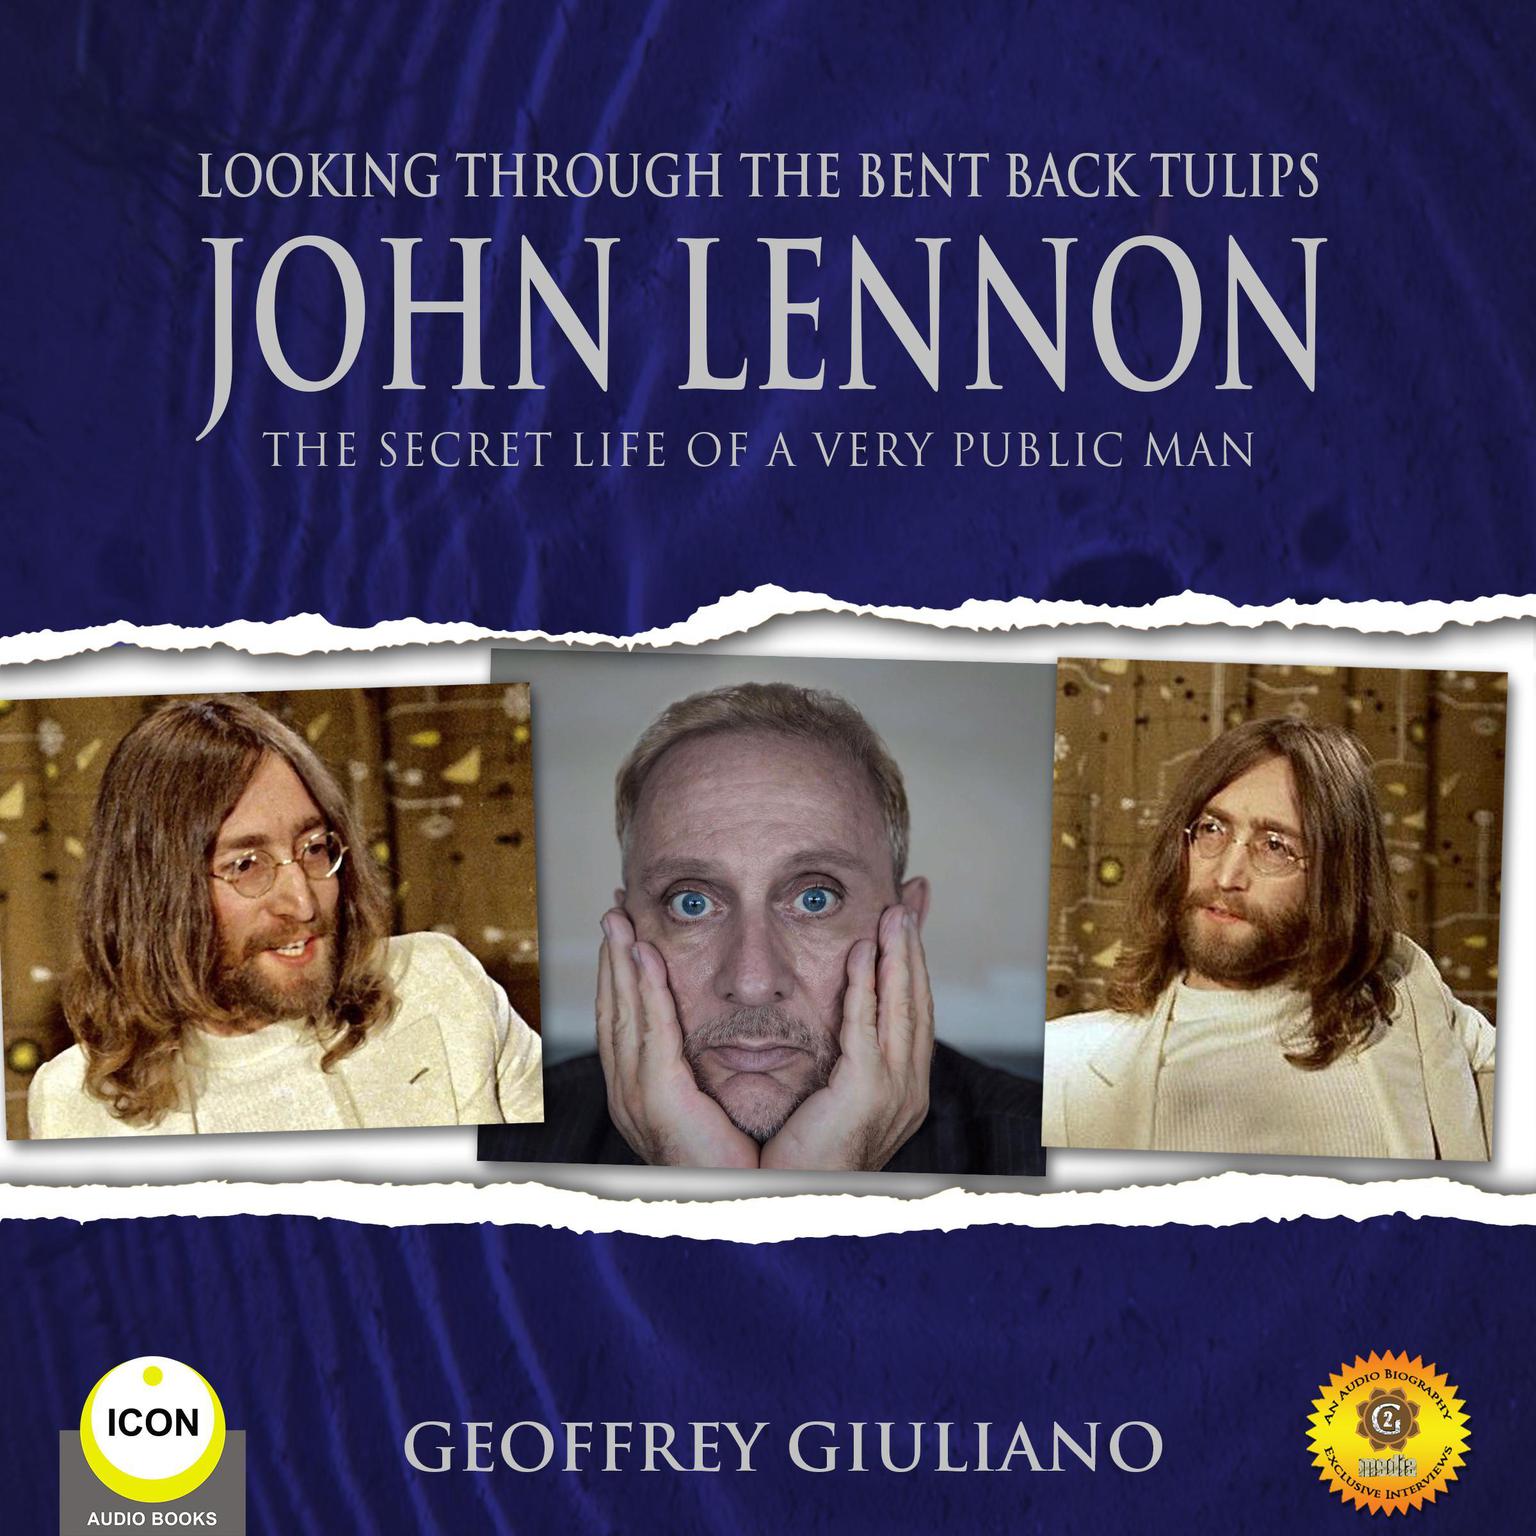 Looking Through the Bent Back Tulips - John Lennon The Secret Life of a Very Public Man Audiobook, by Geoffrey Giuliano